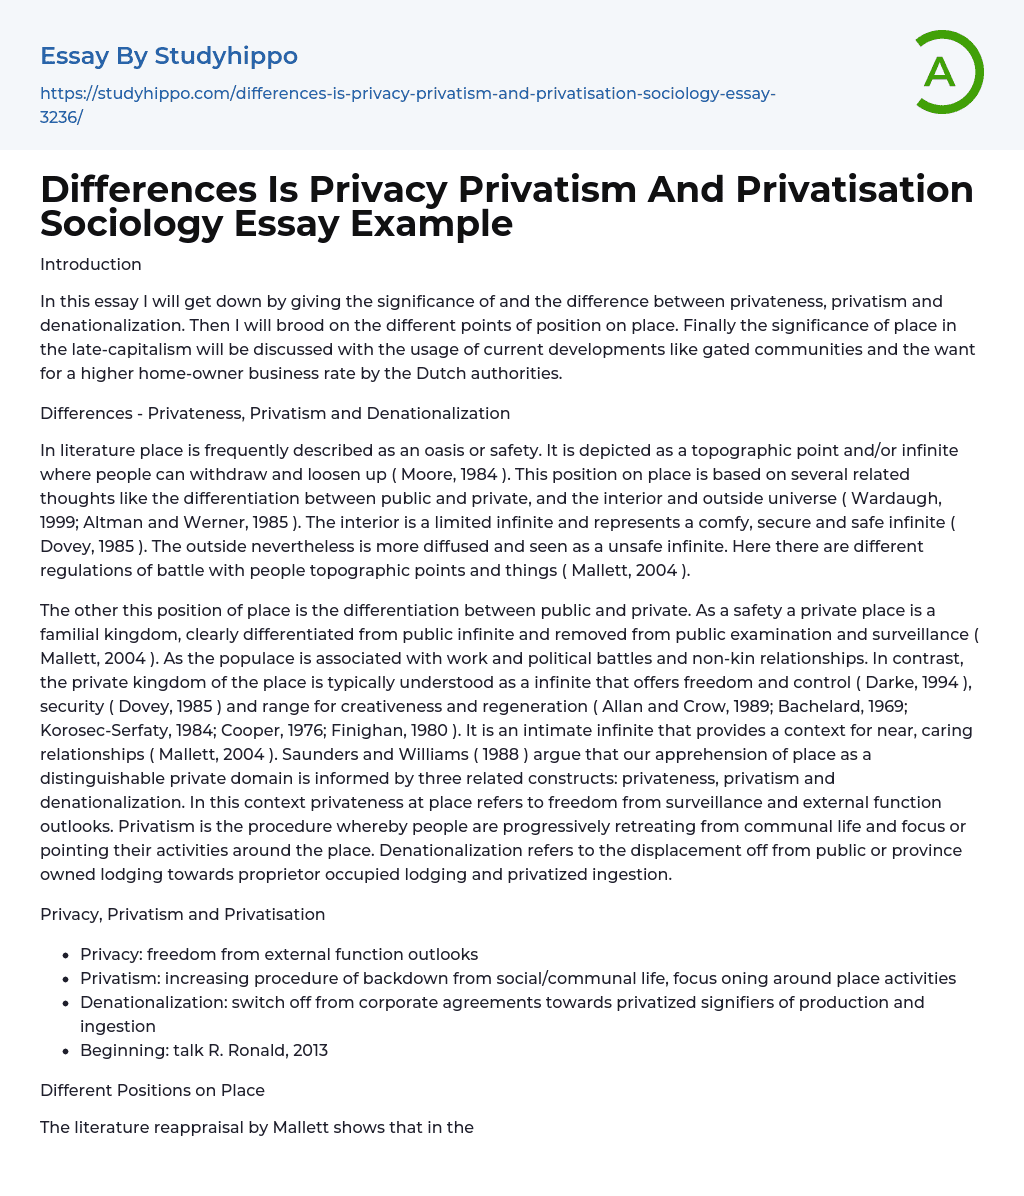 Differences Is Privacy Privatism And Privatisation Sociology Essay Example